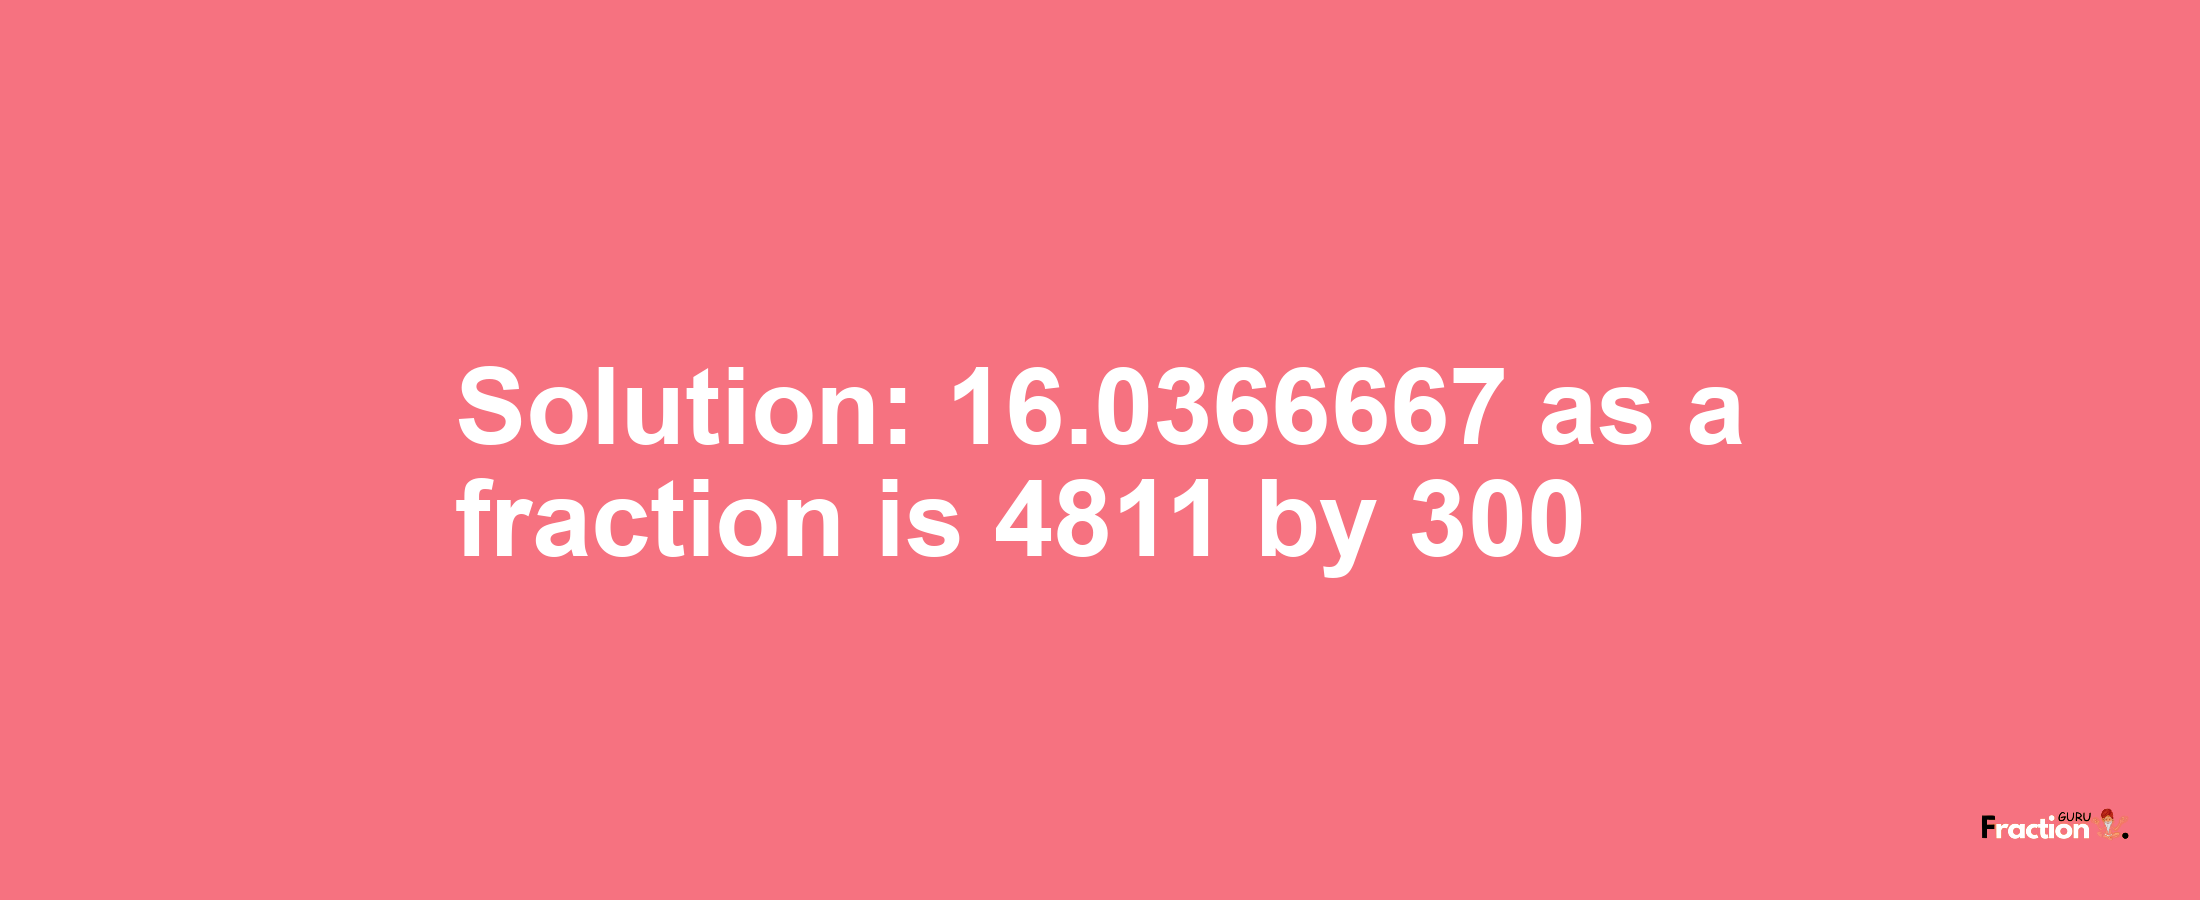 Solution:16.0366667 as a fraction is 4811/300